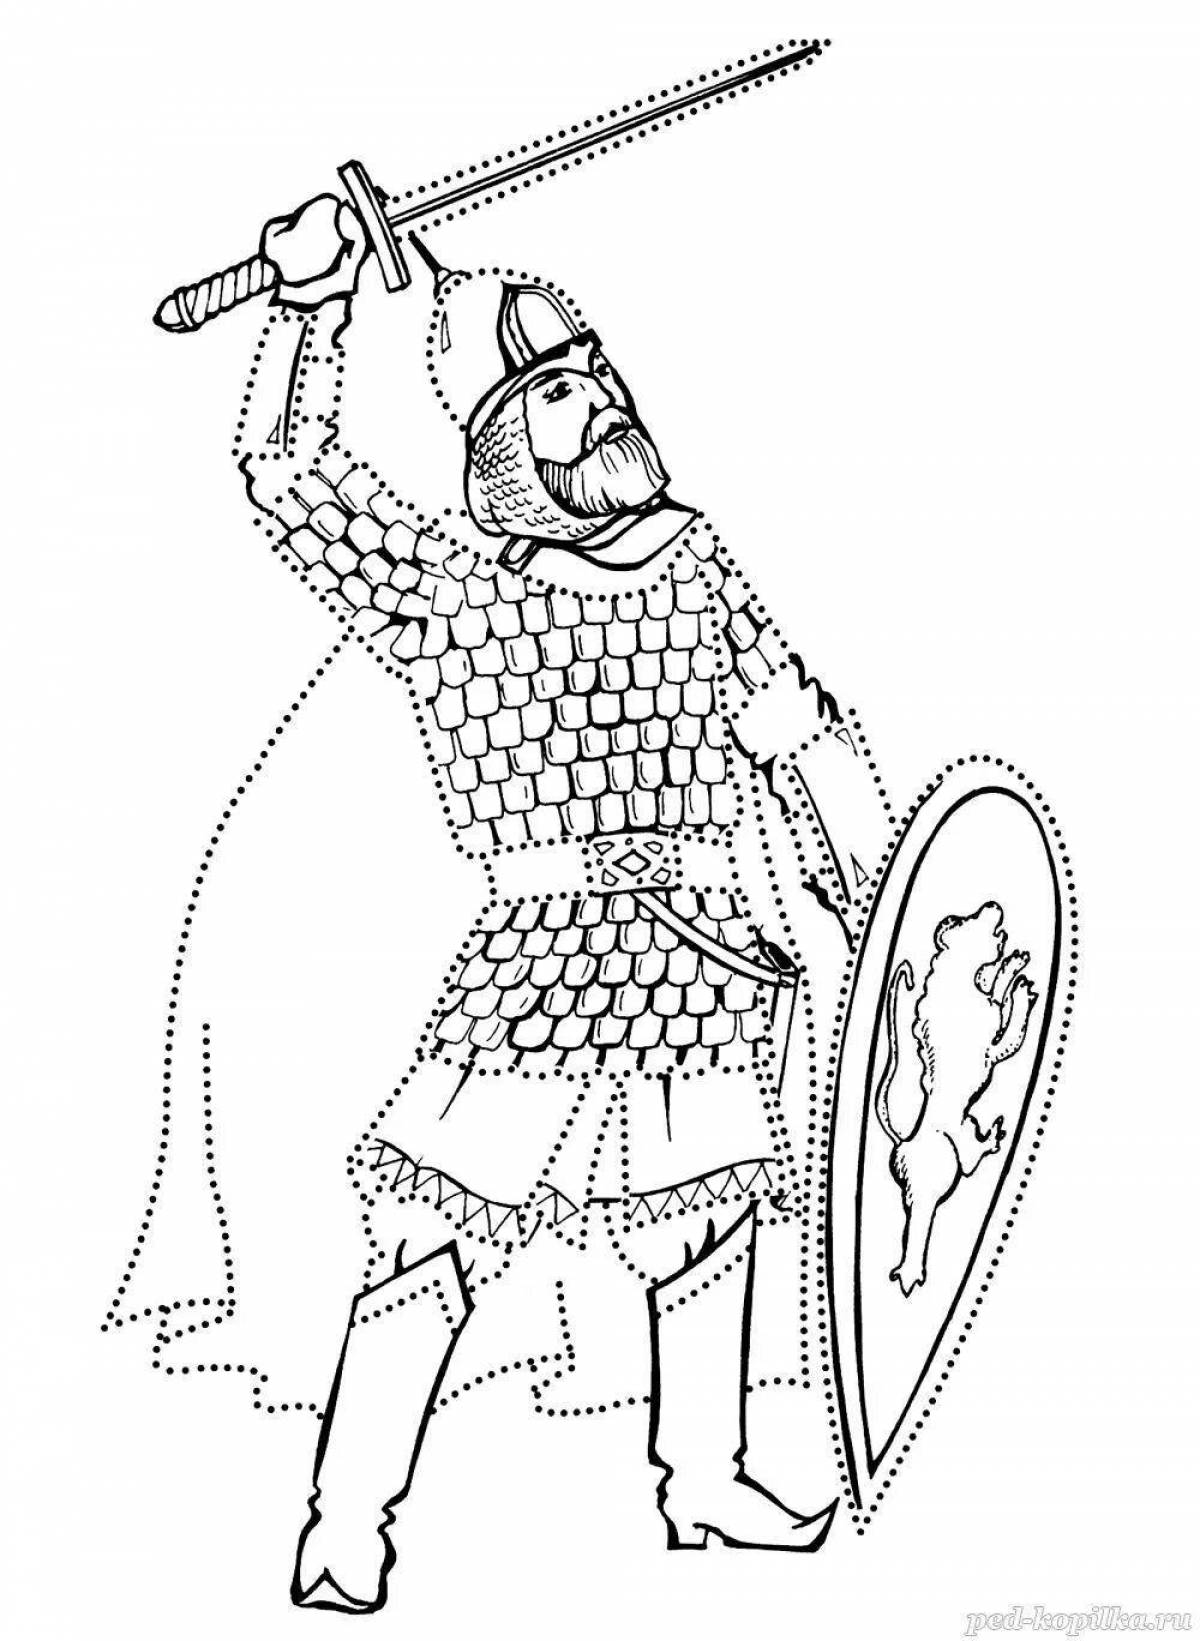 Great russian warrior coloring page